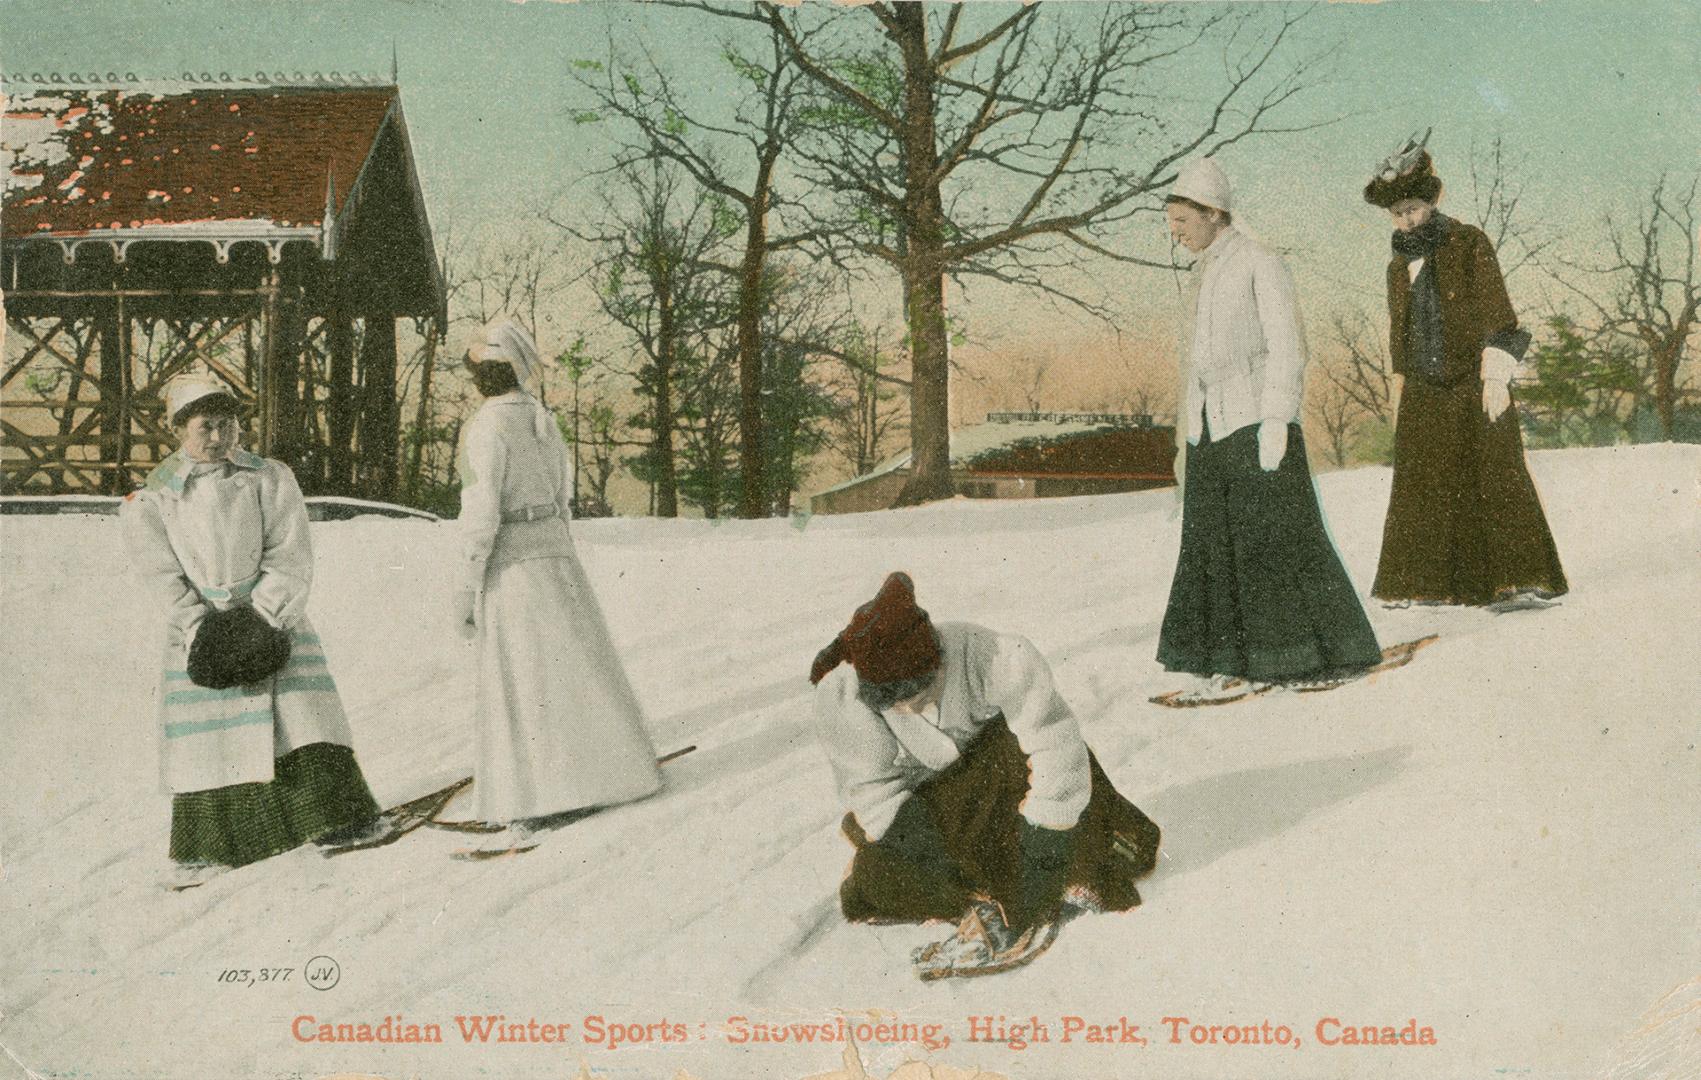 Five woman snowshoeing on a snow covered hill.